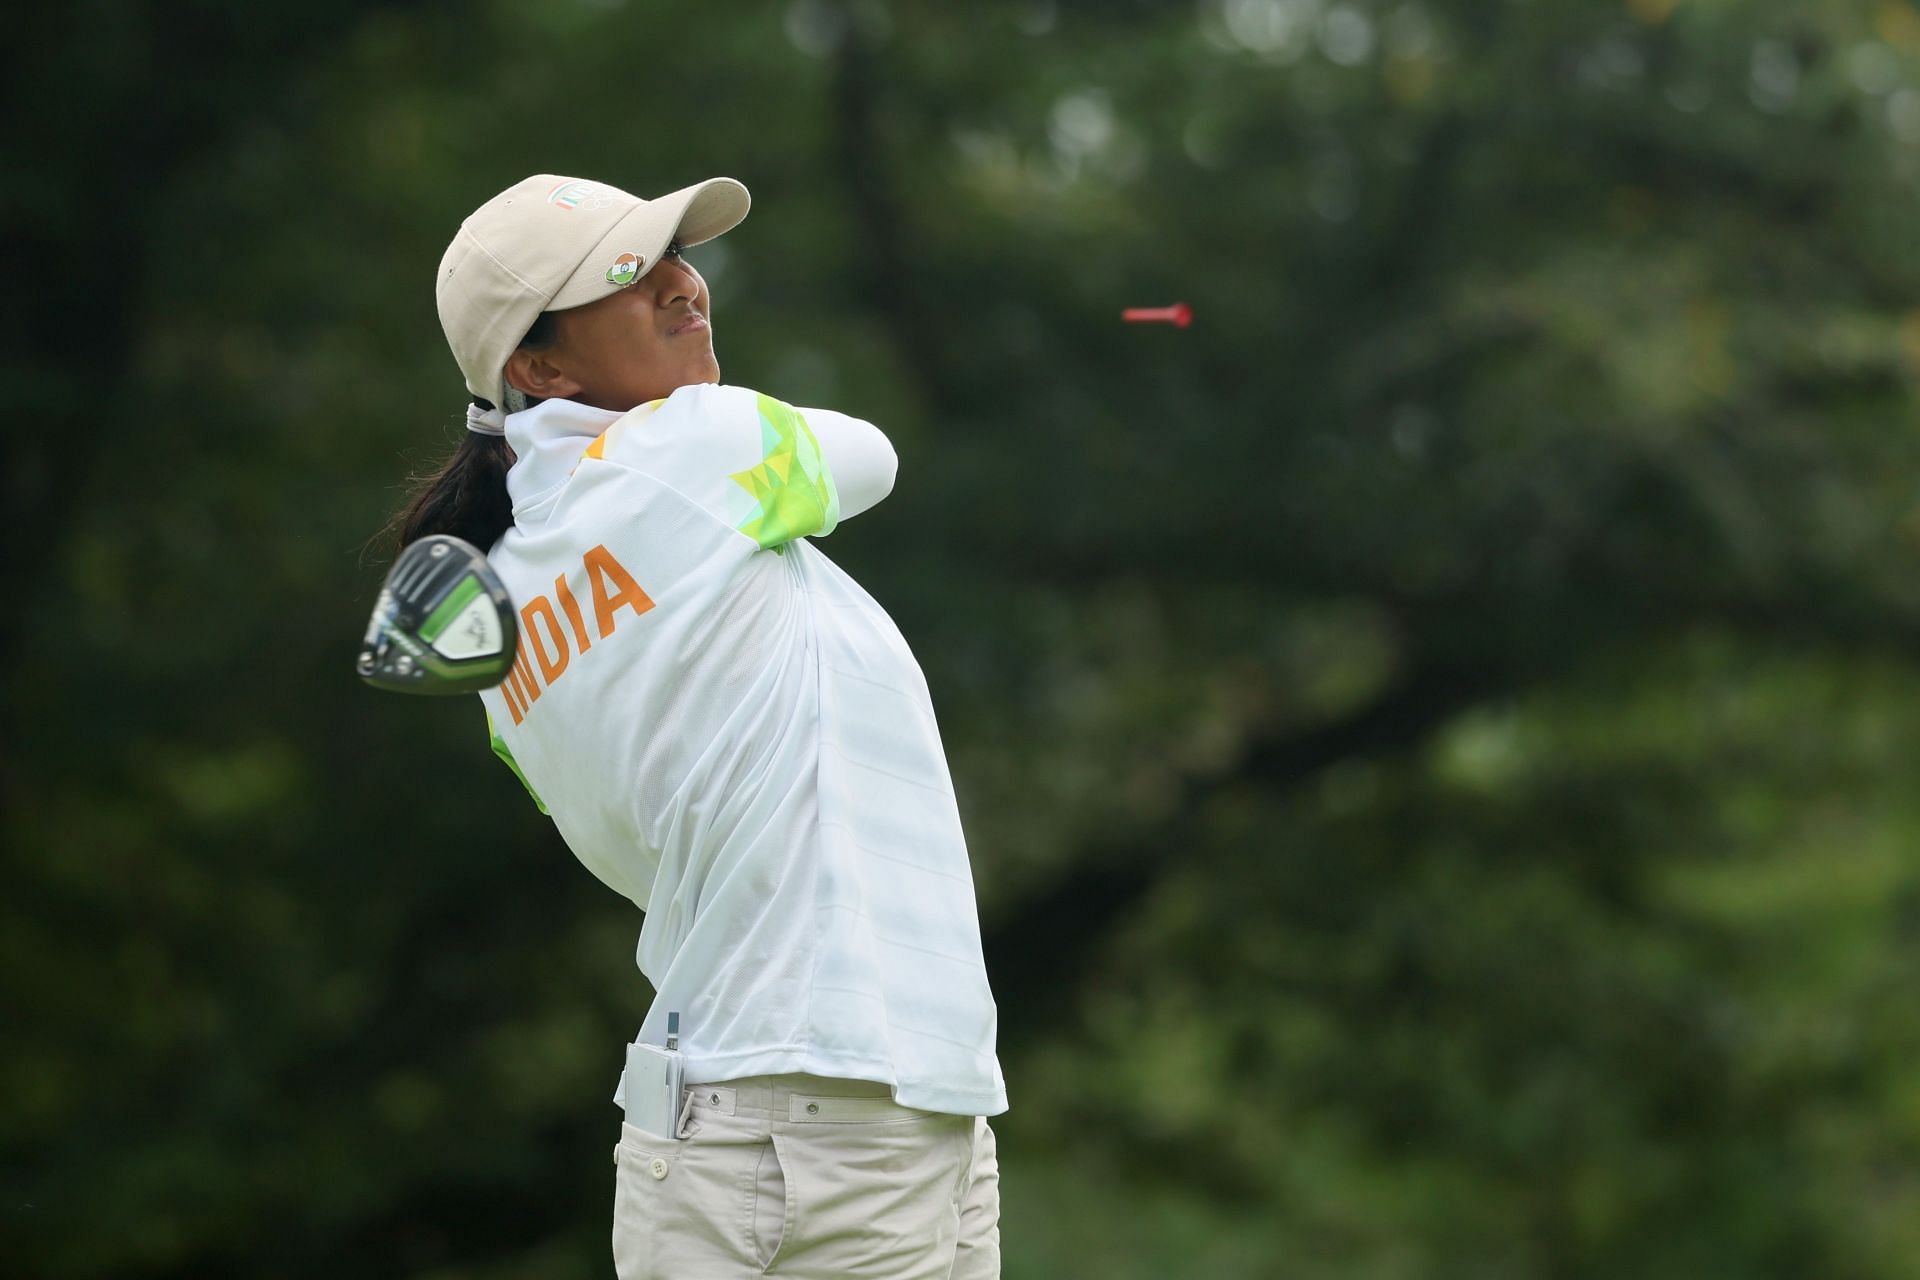 Aditi Ashok at the Tokyo Olympics earlier this year. (PC: Getty Images)